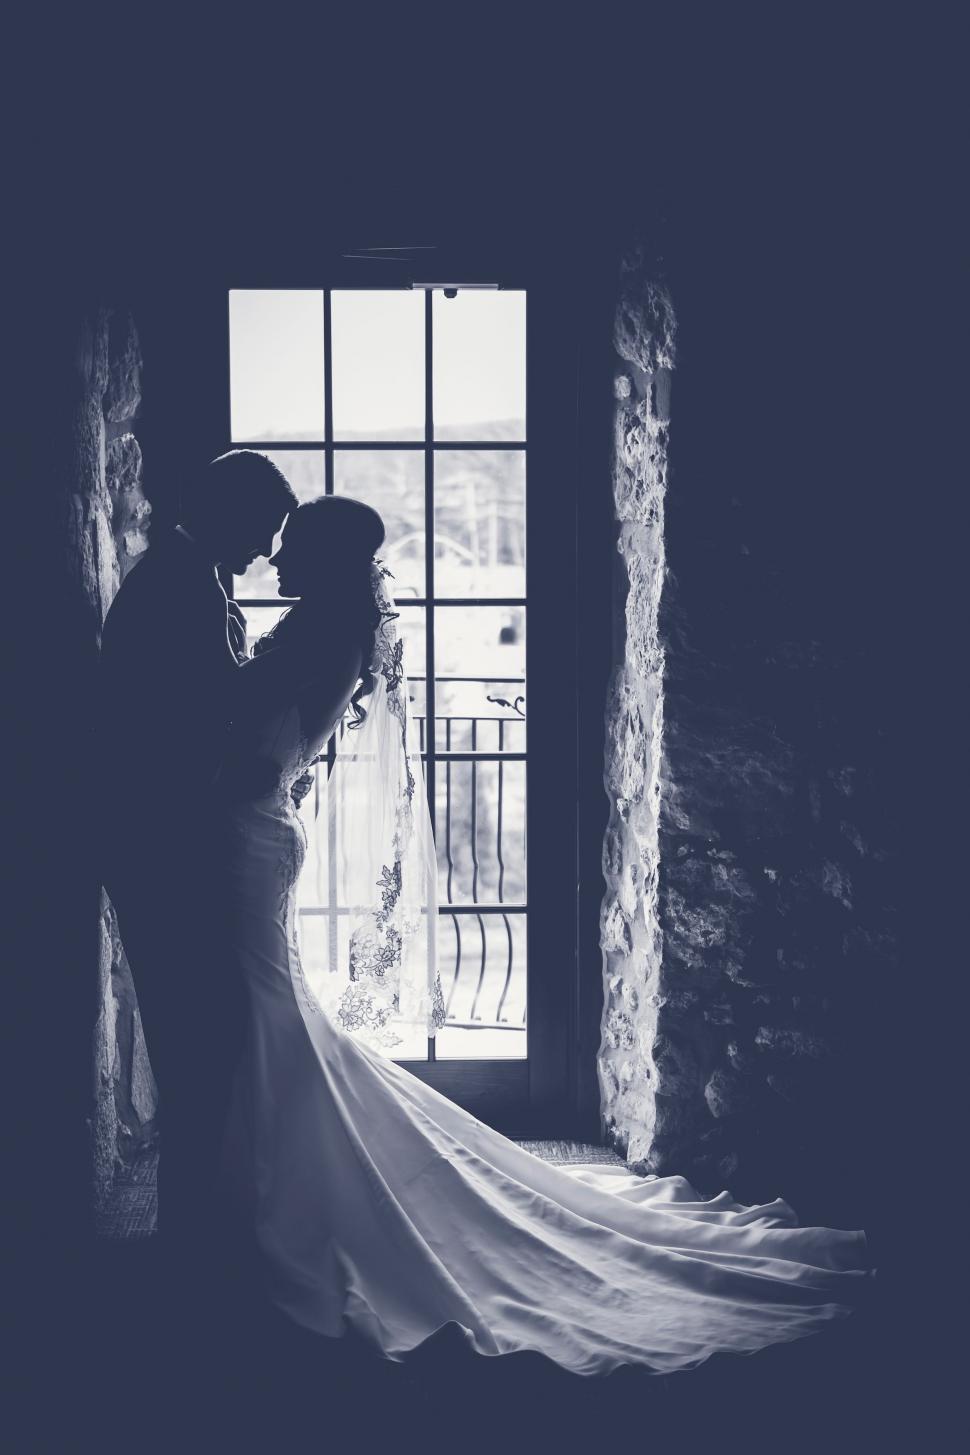 Free Image of Bride and Groom Standing in Front of Window 